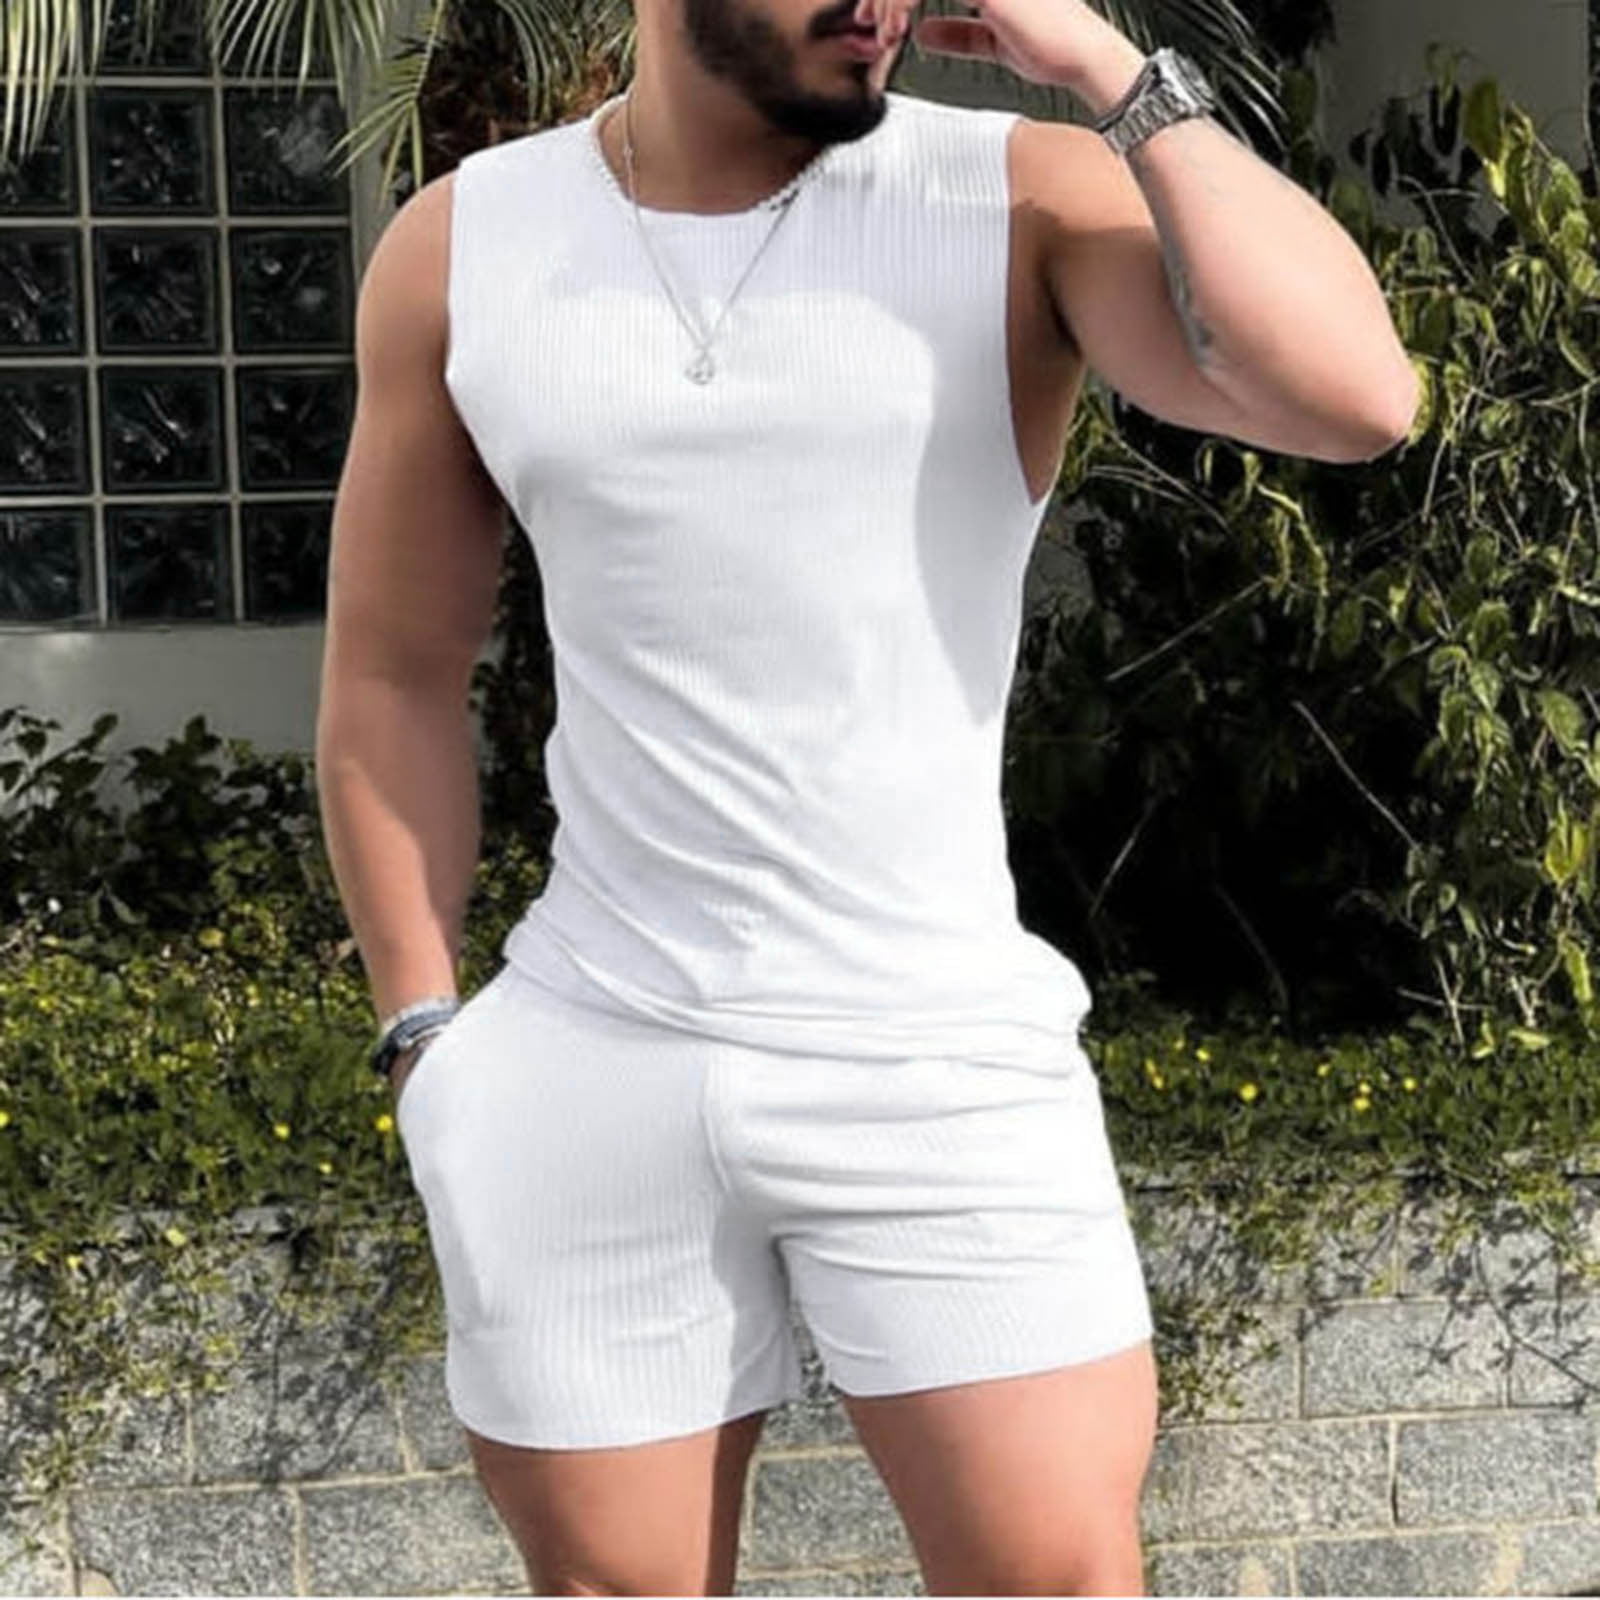 Buy LouVasabuce Men 's Business Waistcoat Suit Dress Sleeveless  Single-Breasted V-Neck Solid Color Slim Fit Vest for Gentlemen, White,  X-Large at Amazon.in